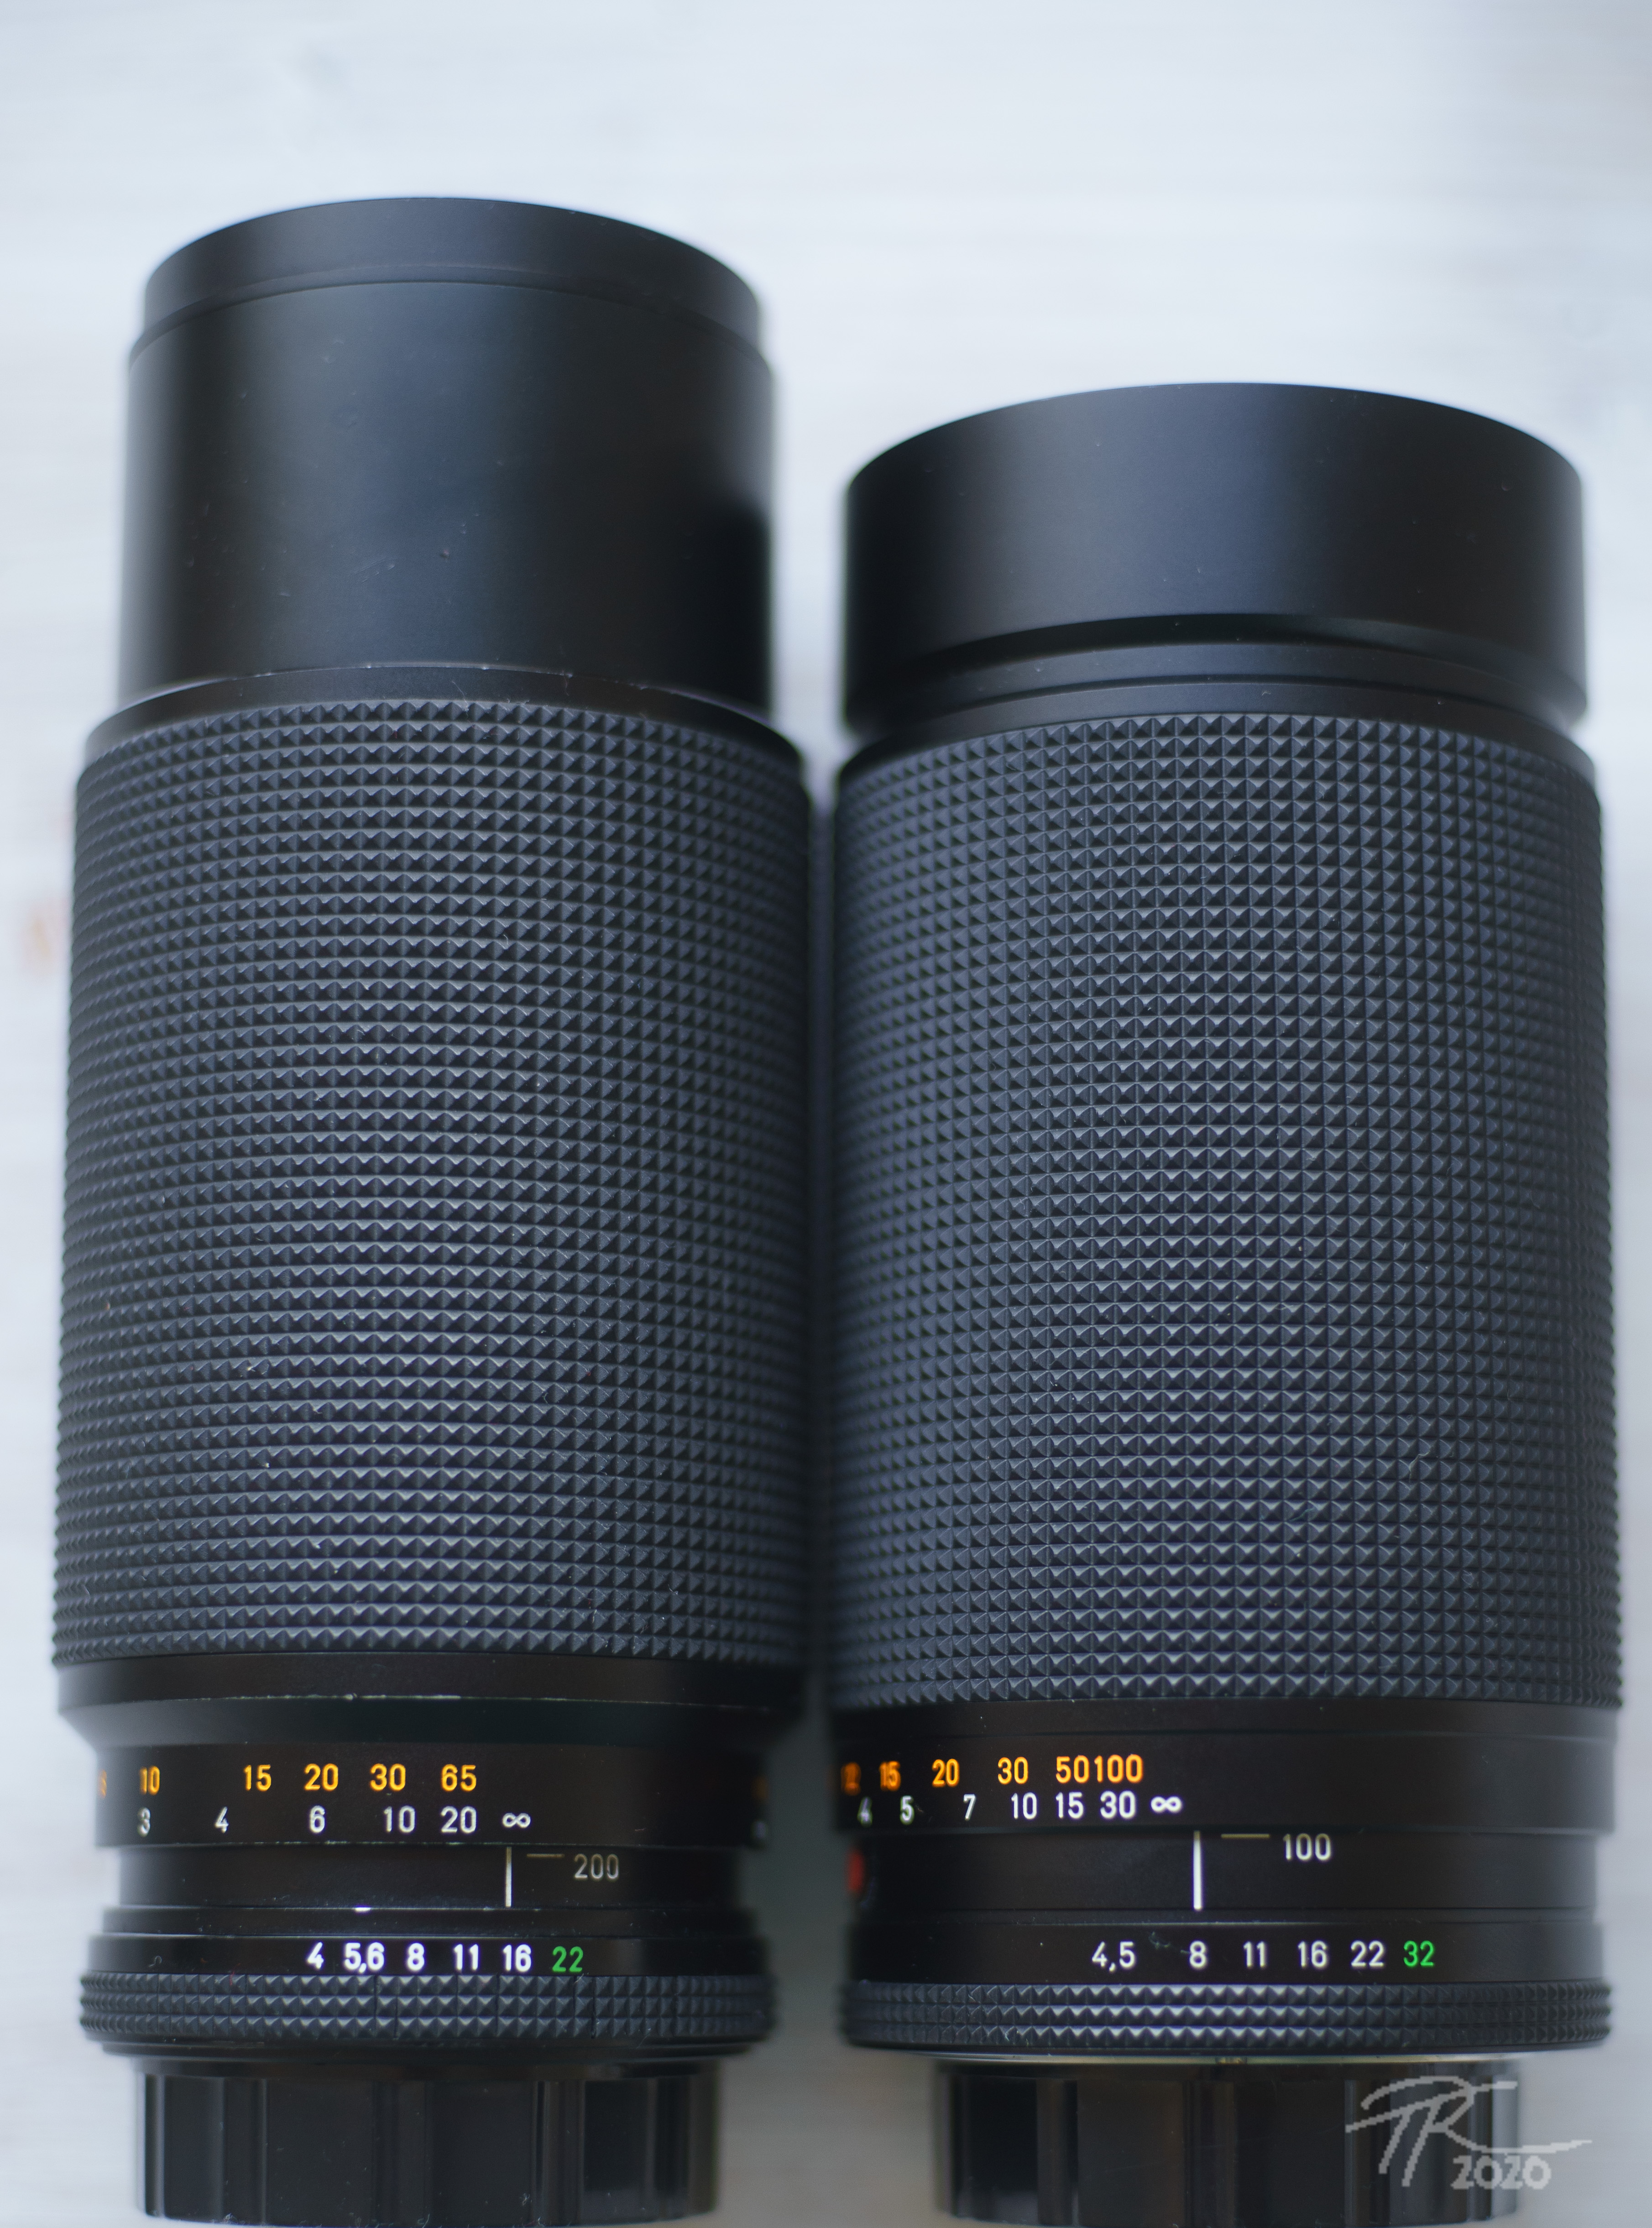 A Zeiss legend and its viceroy – The other side of Bokeh